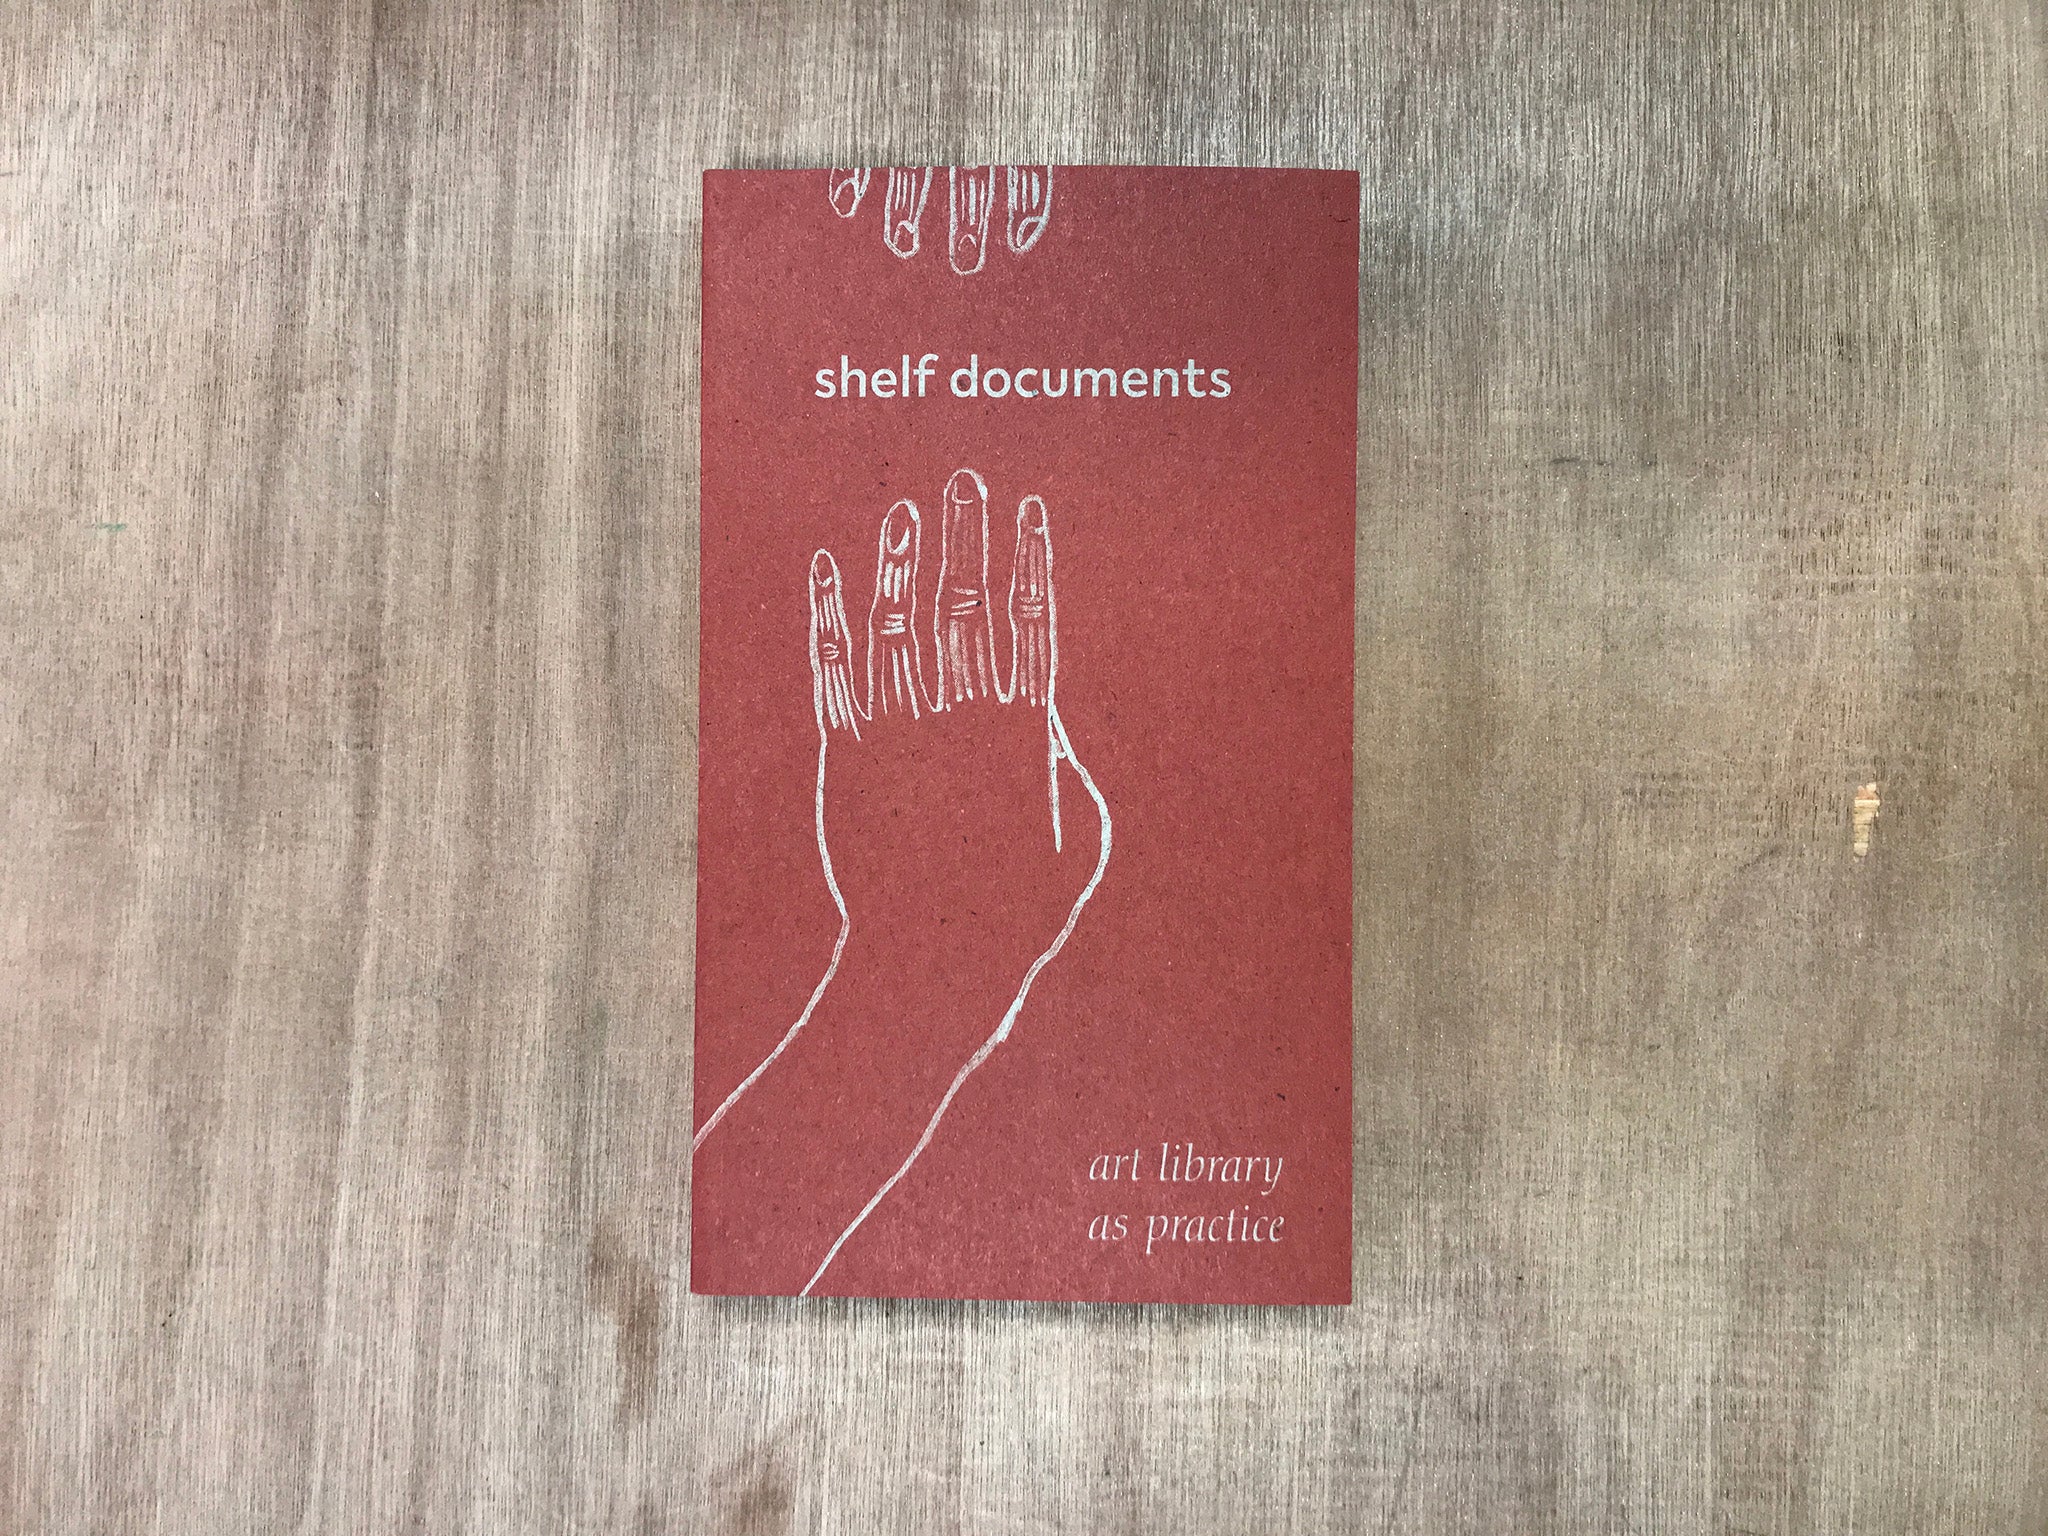 SHELF DOCUMENTS: ART LIBRARY AS PRACTICE